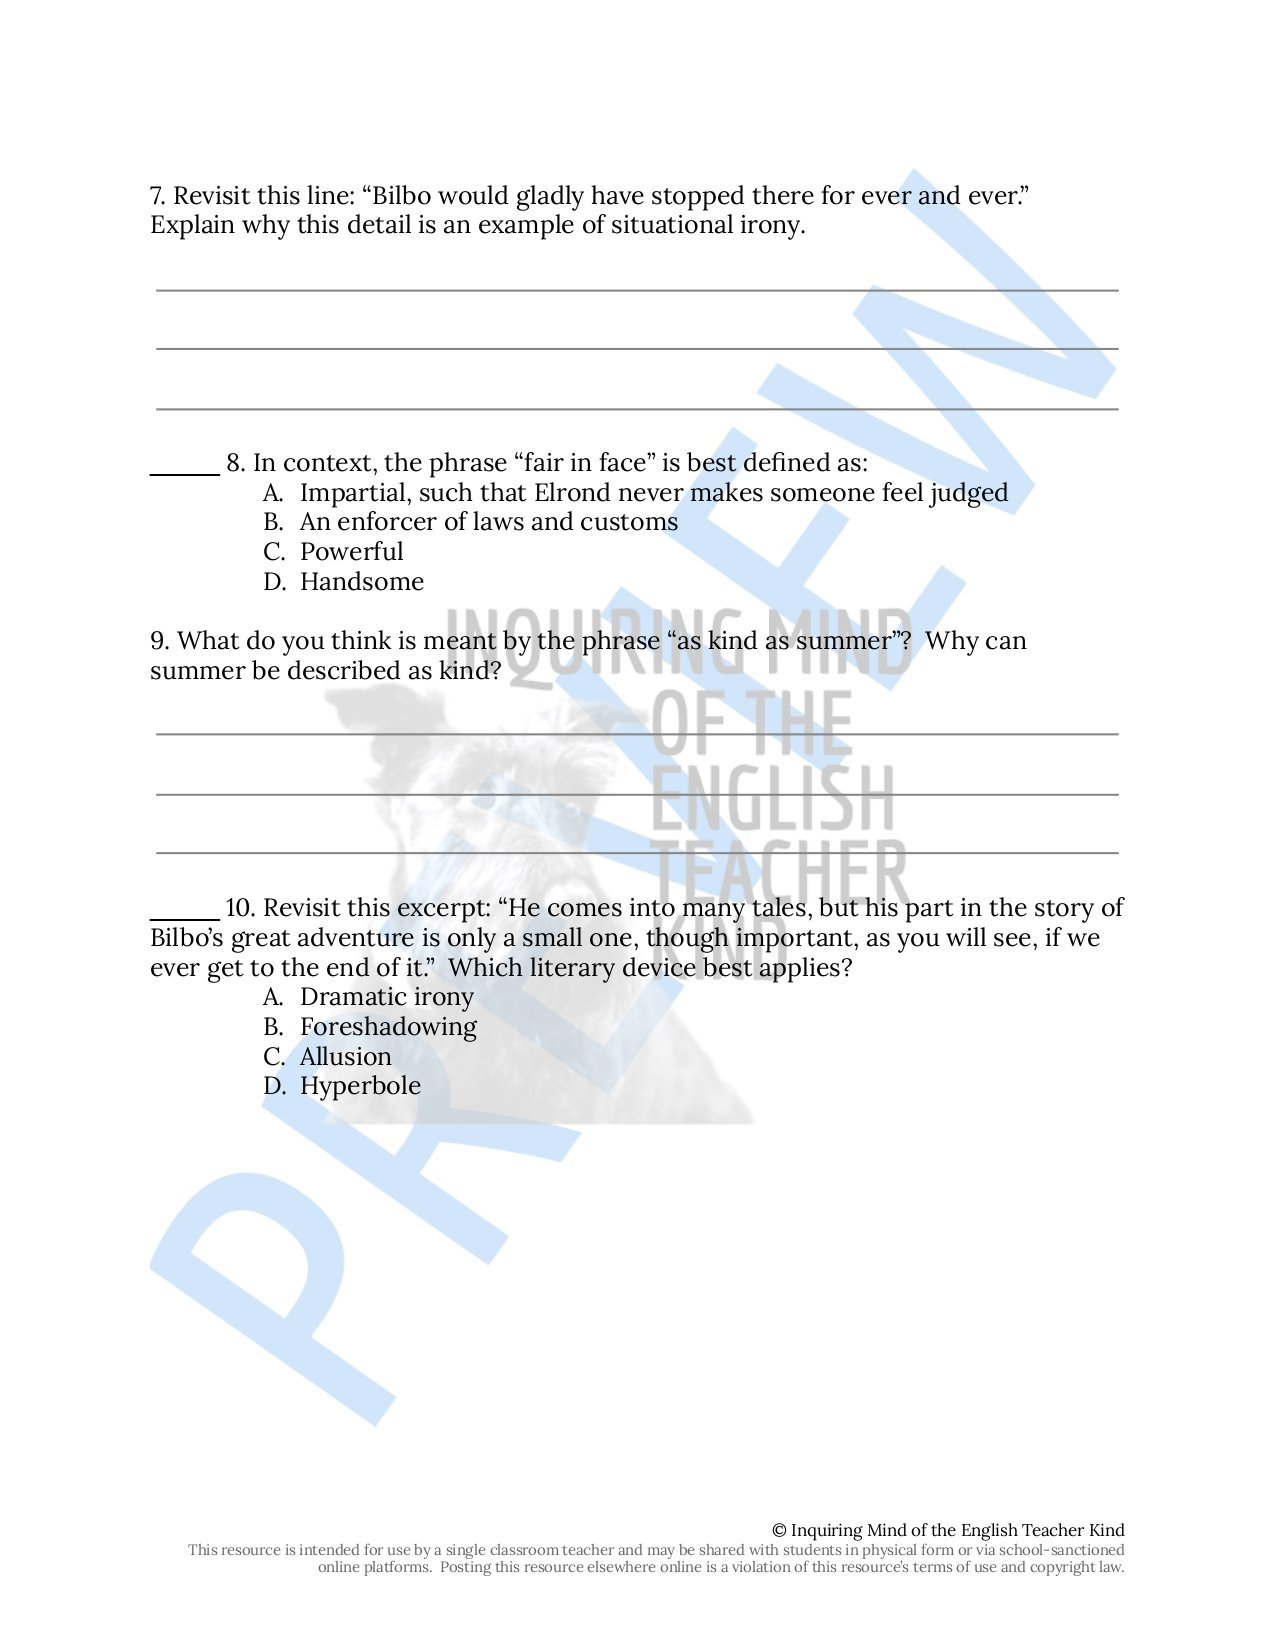 the-hobbit-chapter-3-close-reading-worksheet-and-answer-key-inquiring-mind-of-the-english